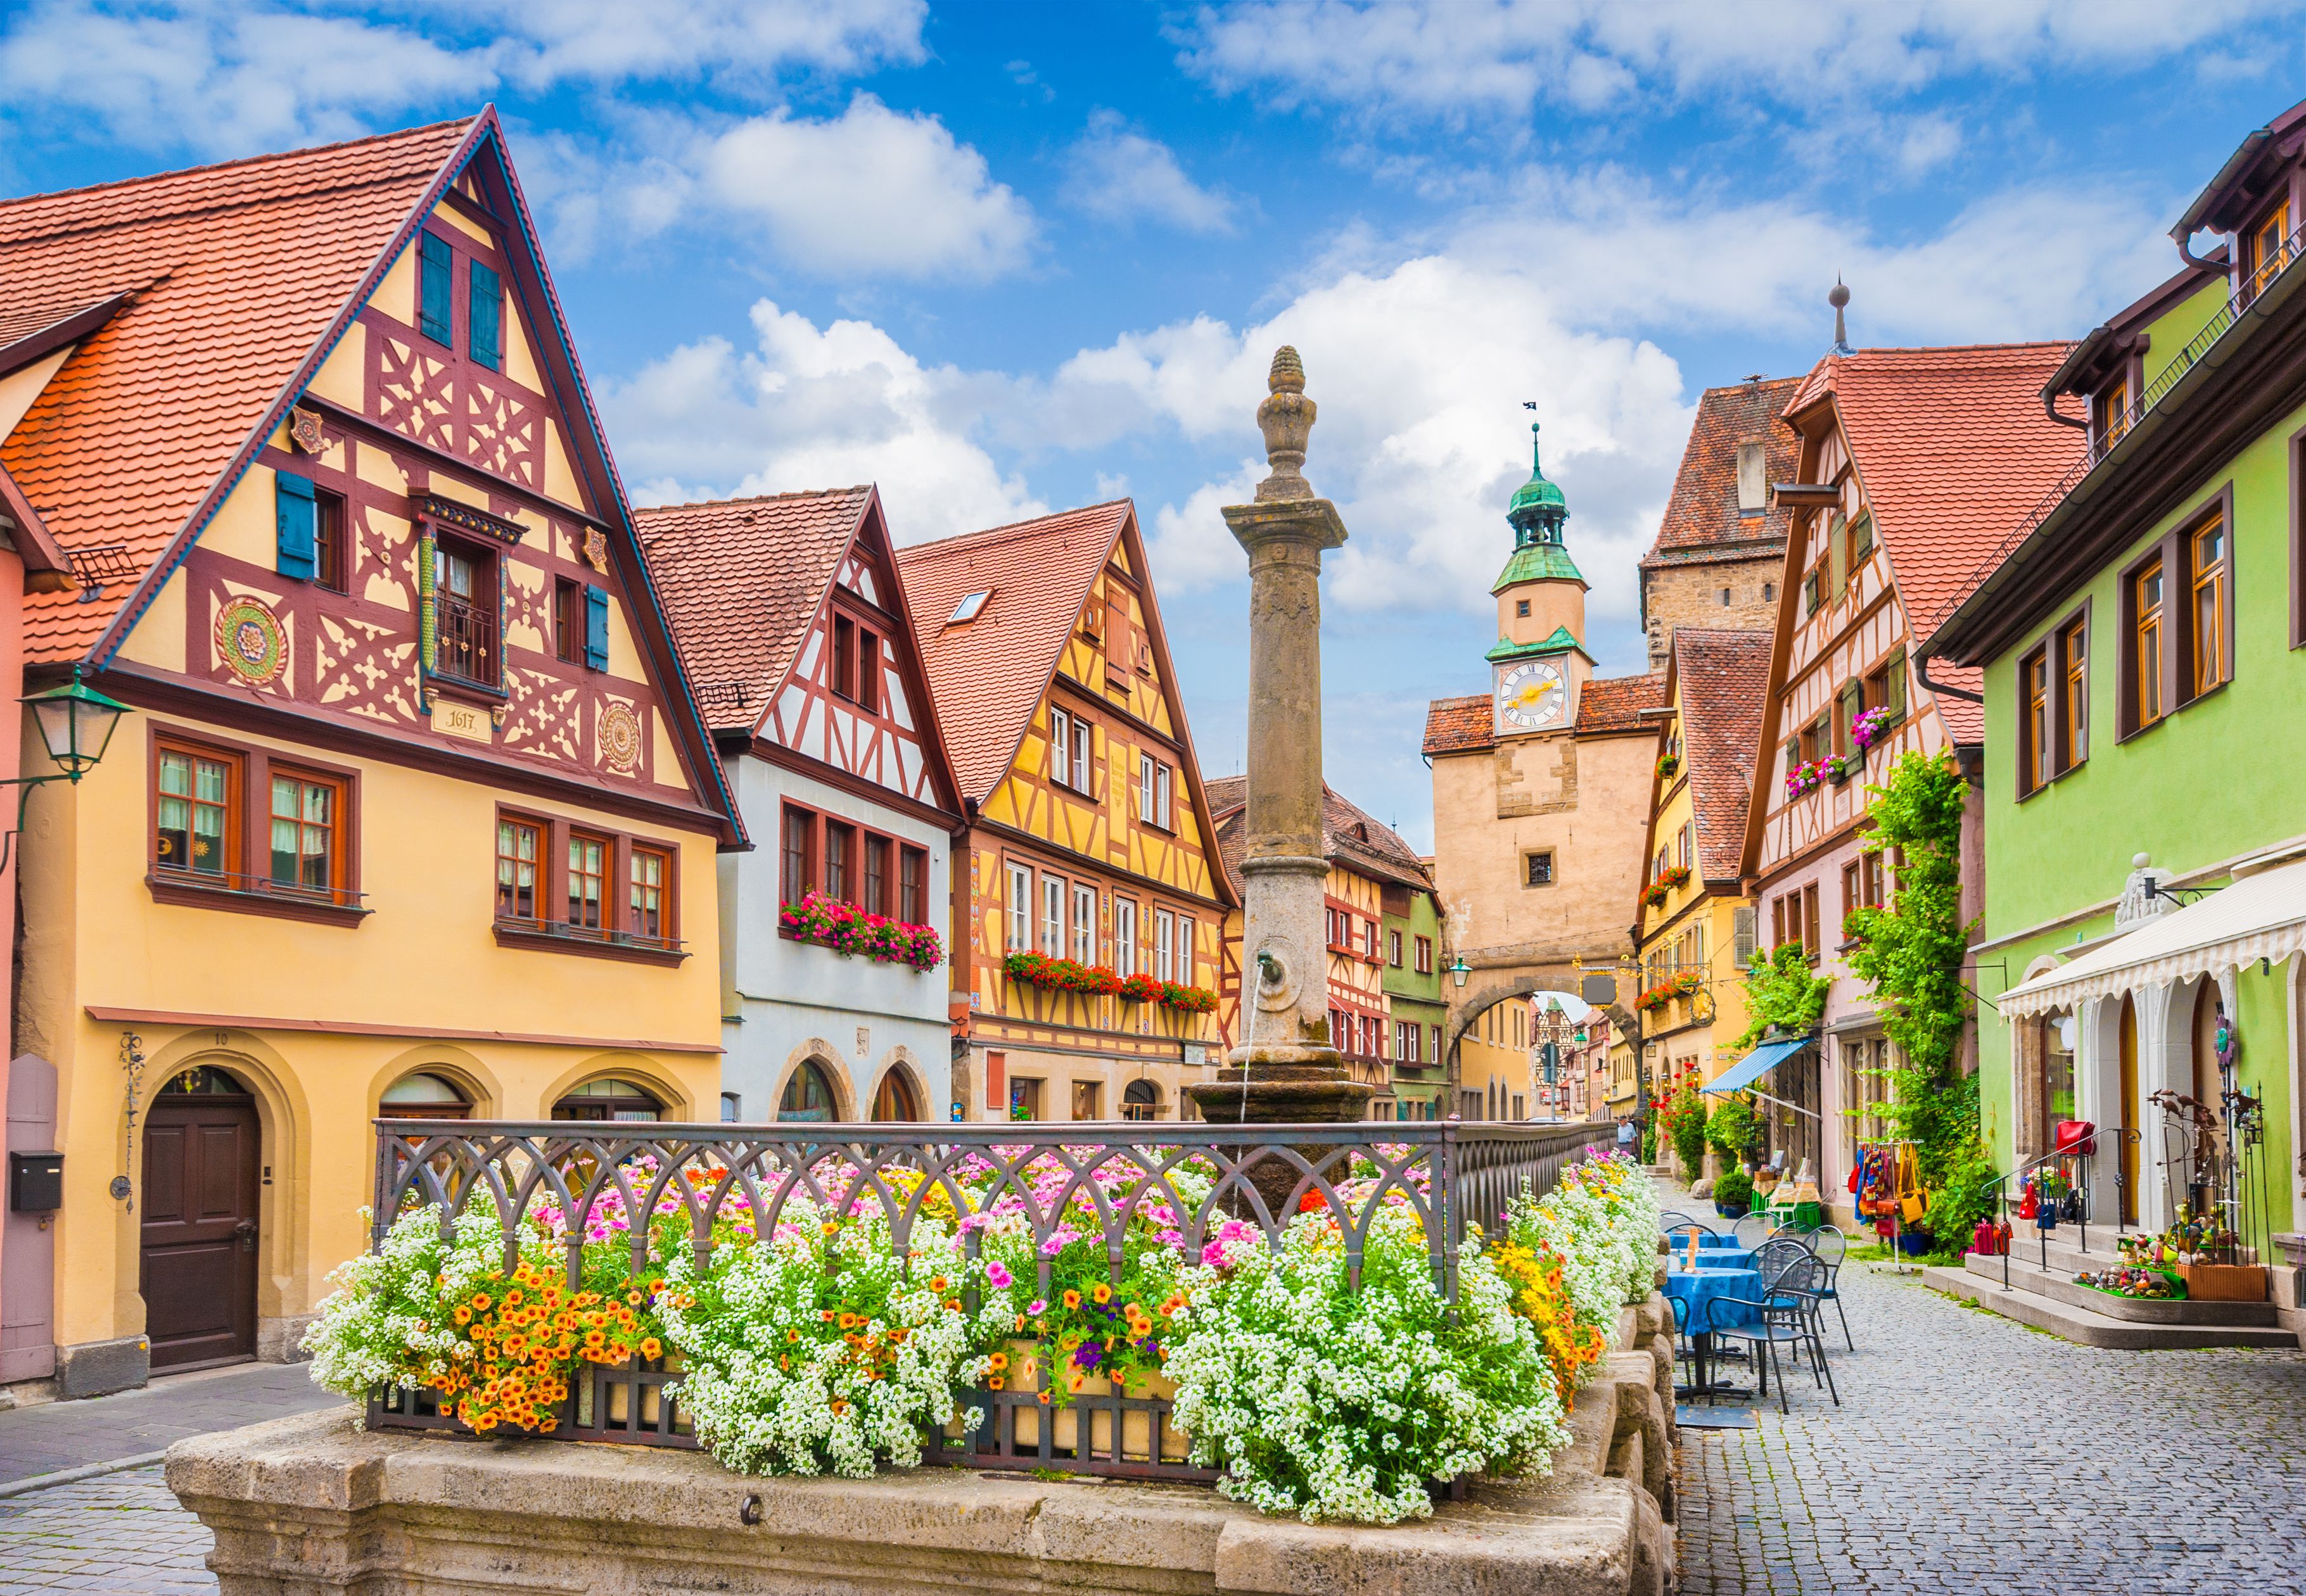 Photos Of The Romantic Road In Germany